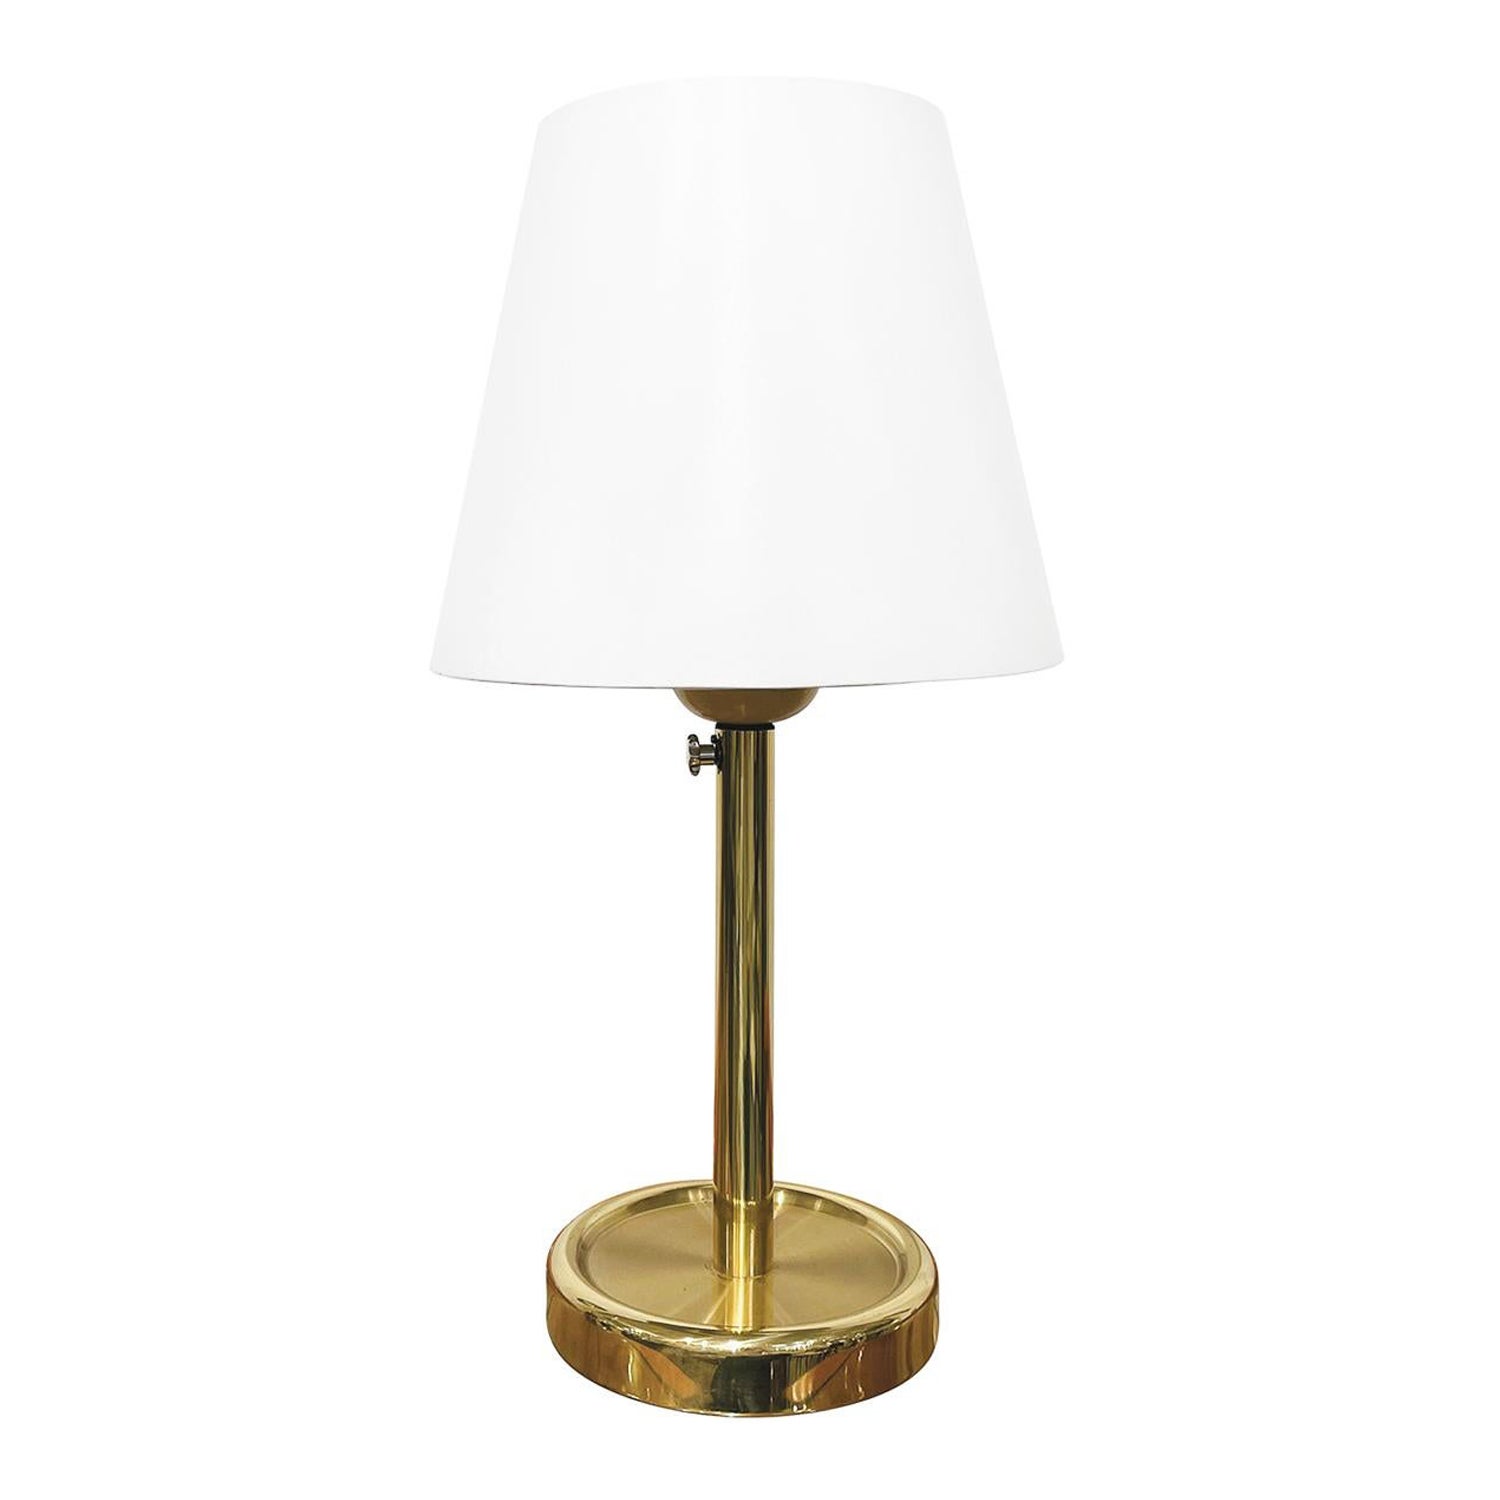 20th Century Swedish Polished Brass Lamp - Desk Light by Fagerhults Belysning For Sale